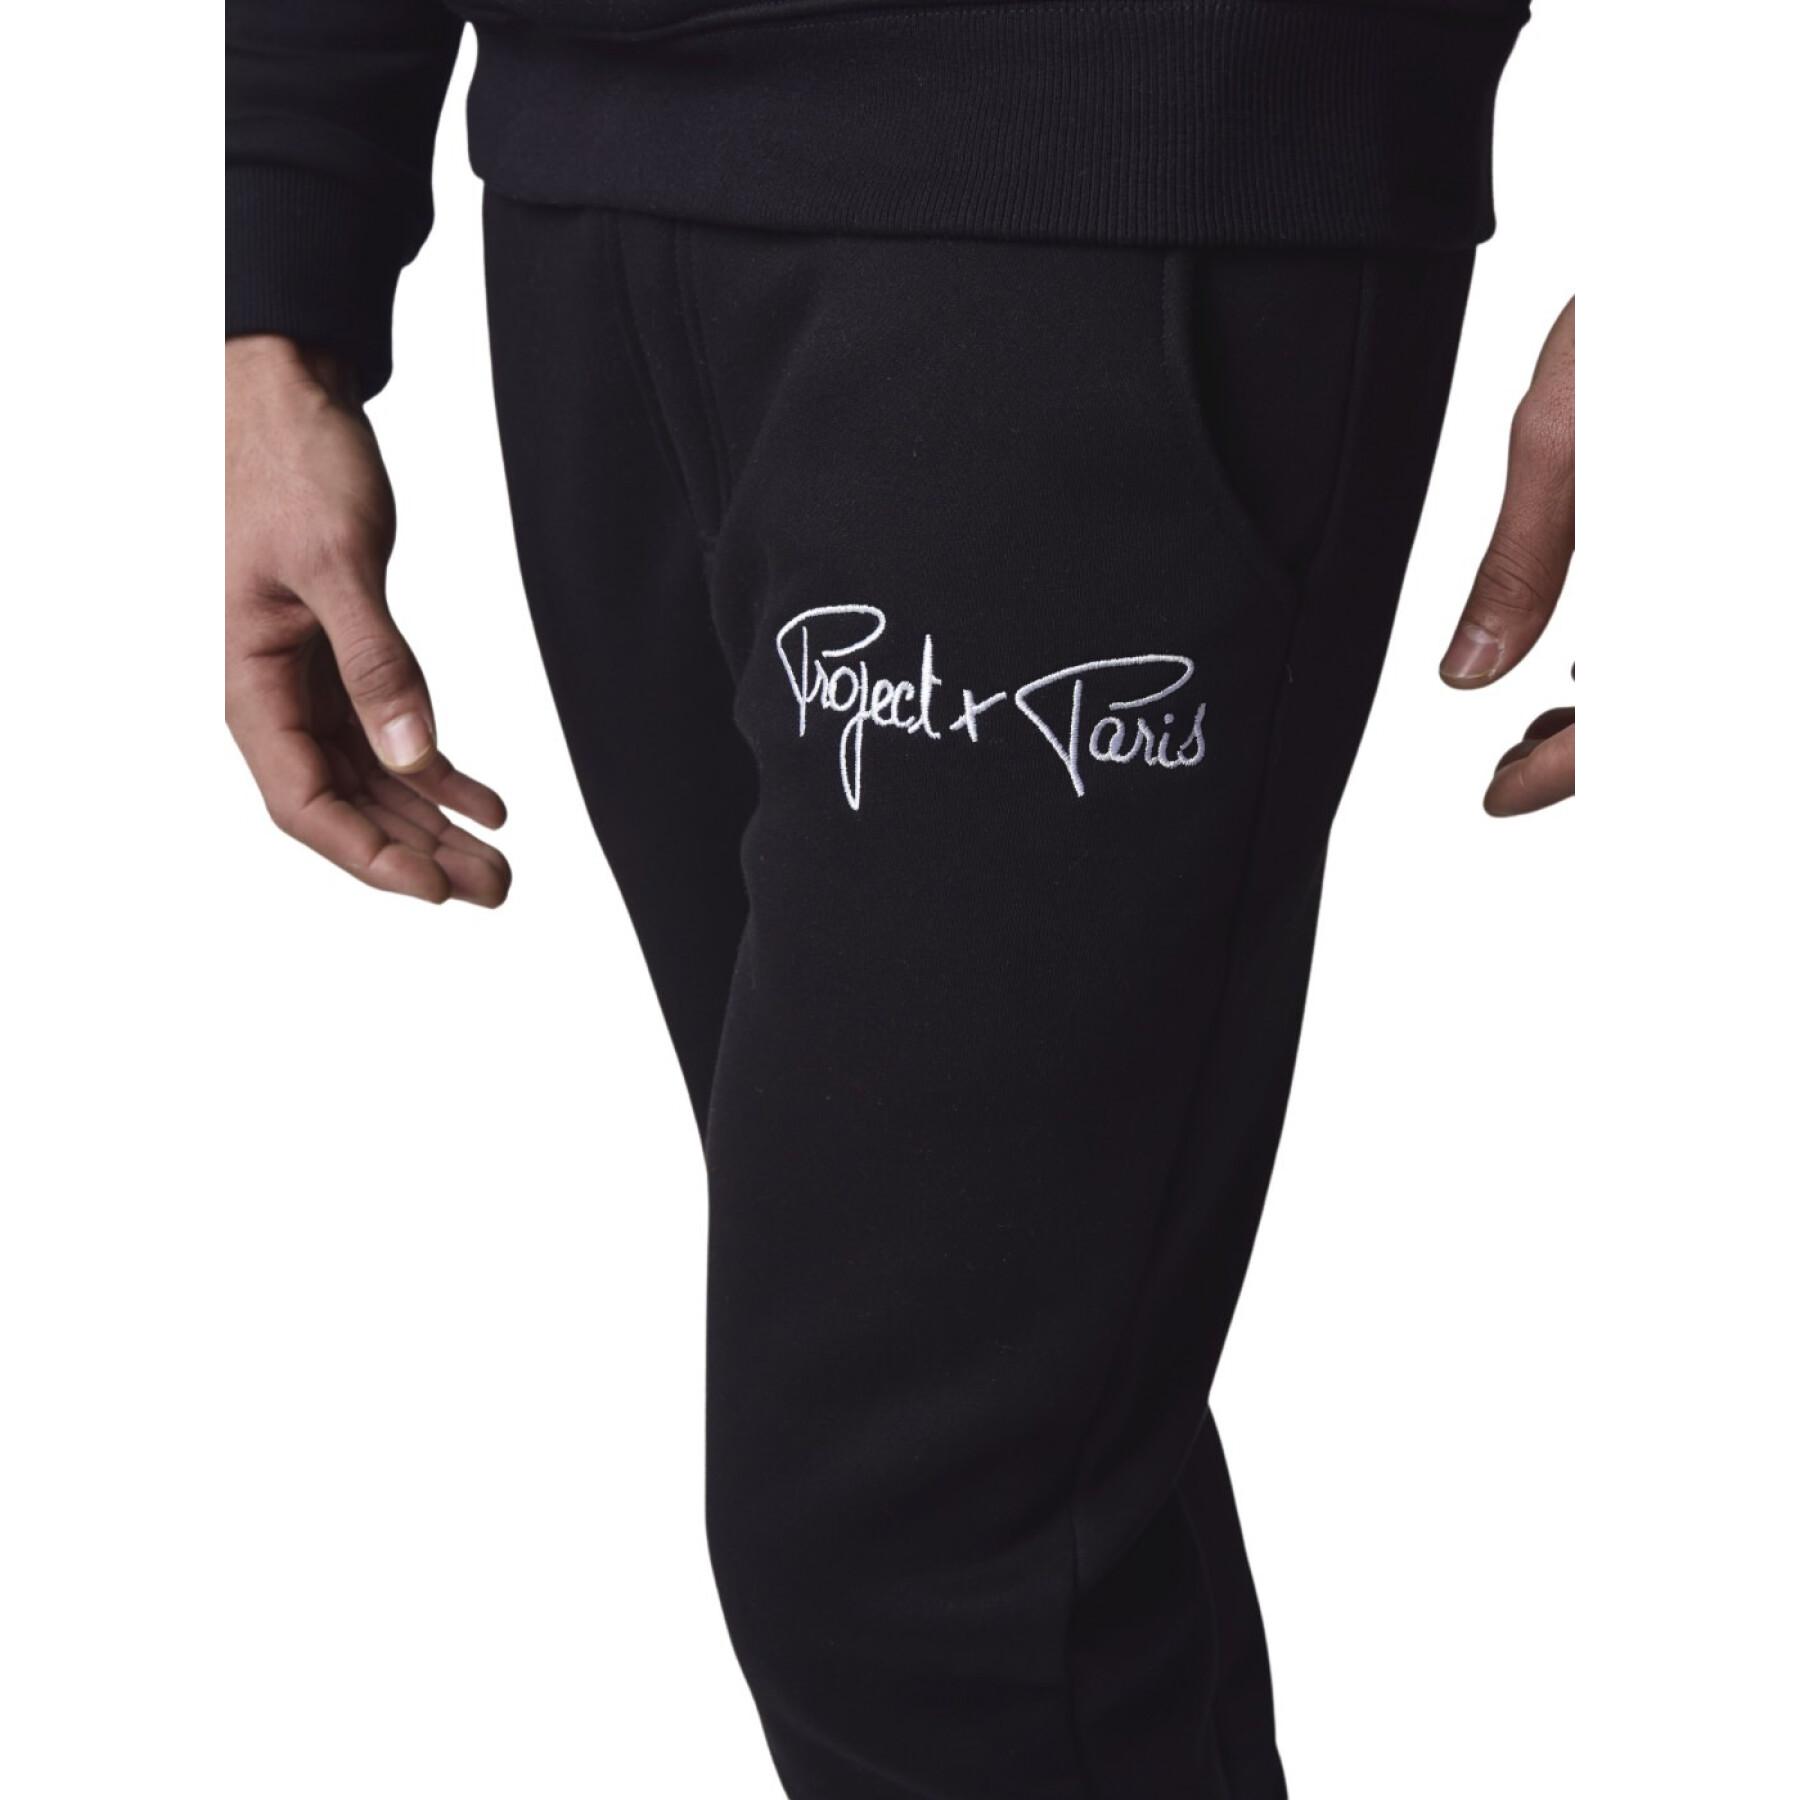 Signature jogging suit with logo embroidery Project X Paris